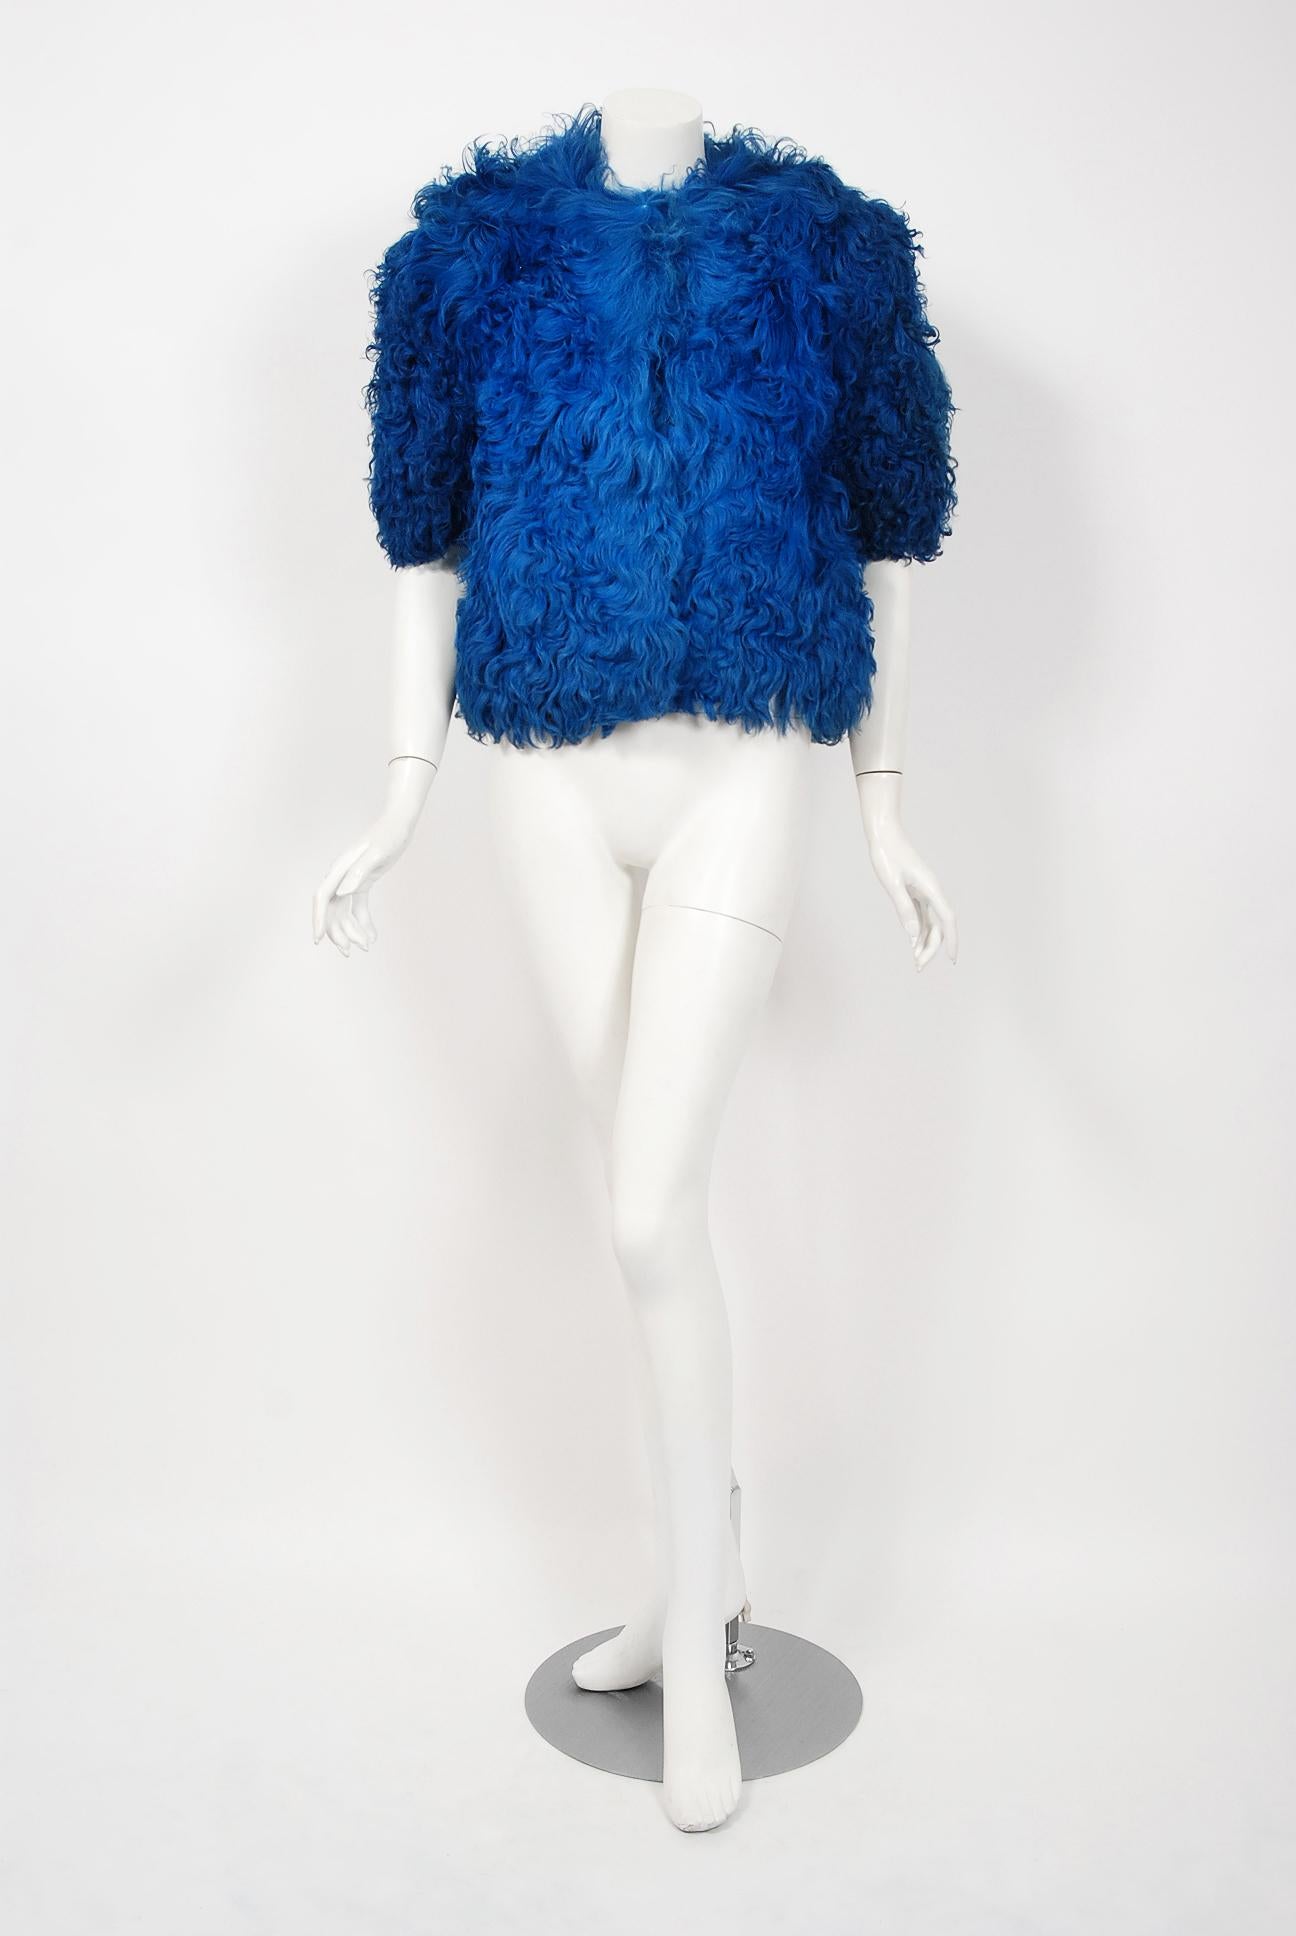 This exquisite 1970's Monsieur of Paris genuine curly-lamb bolero will make any woman shine during the colder months ahead. The luxurious Mongolian fur has been carefully dyed and the sapphire-blue color is really breathtaking. Chic cropped sleeves,